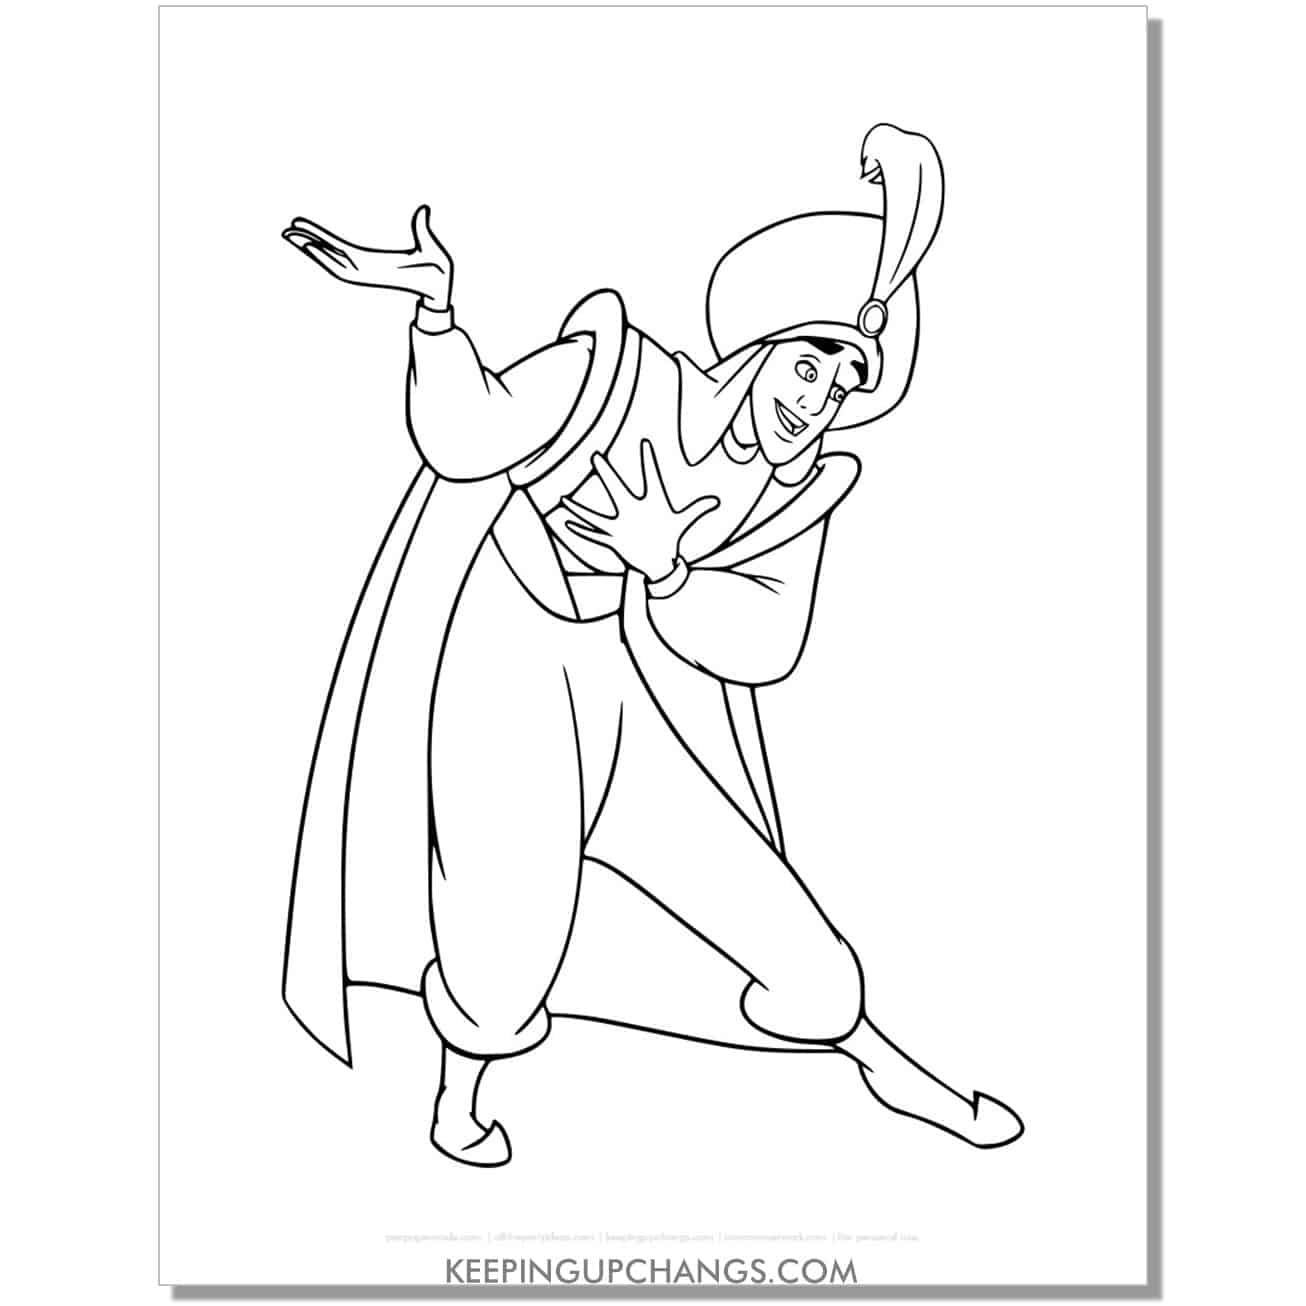 aladdin as prince ali taking a bow coloring page, sheet.